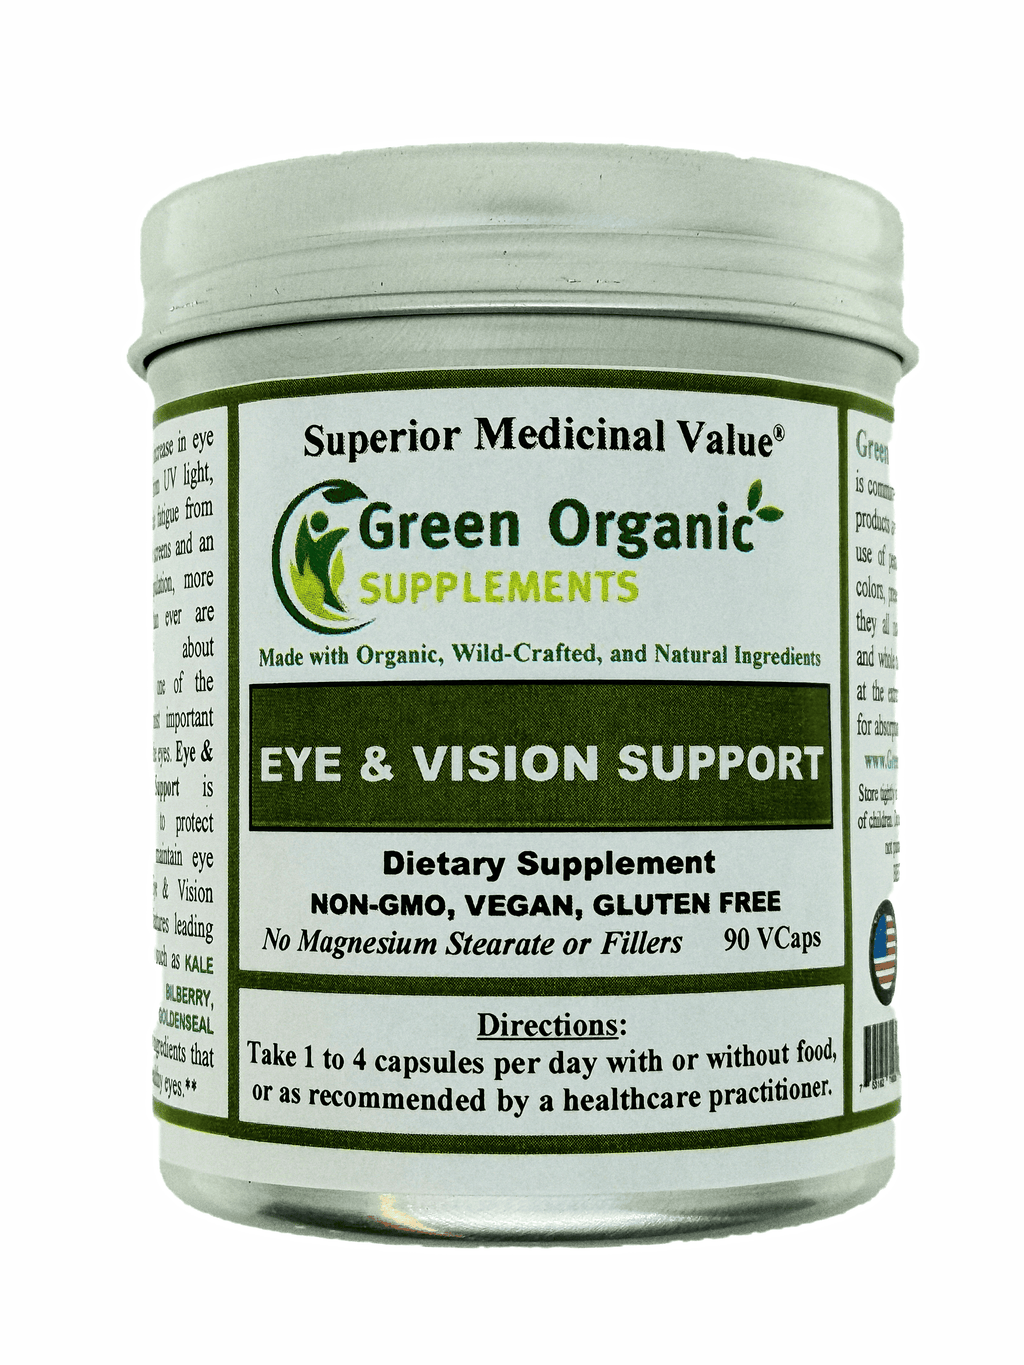 Buy organic supplements - Eye & Vision Support